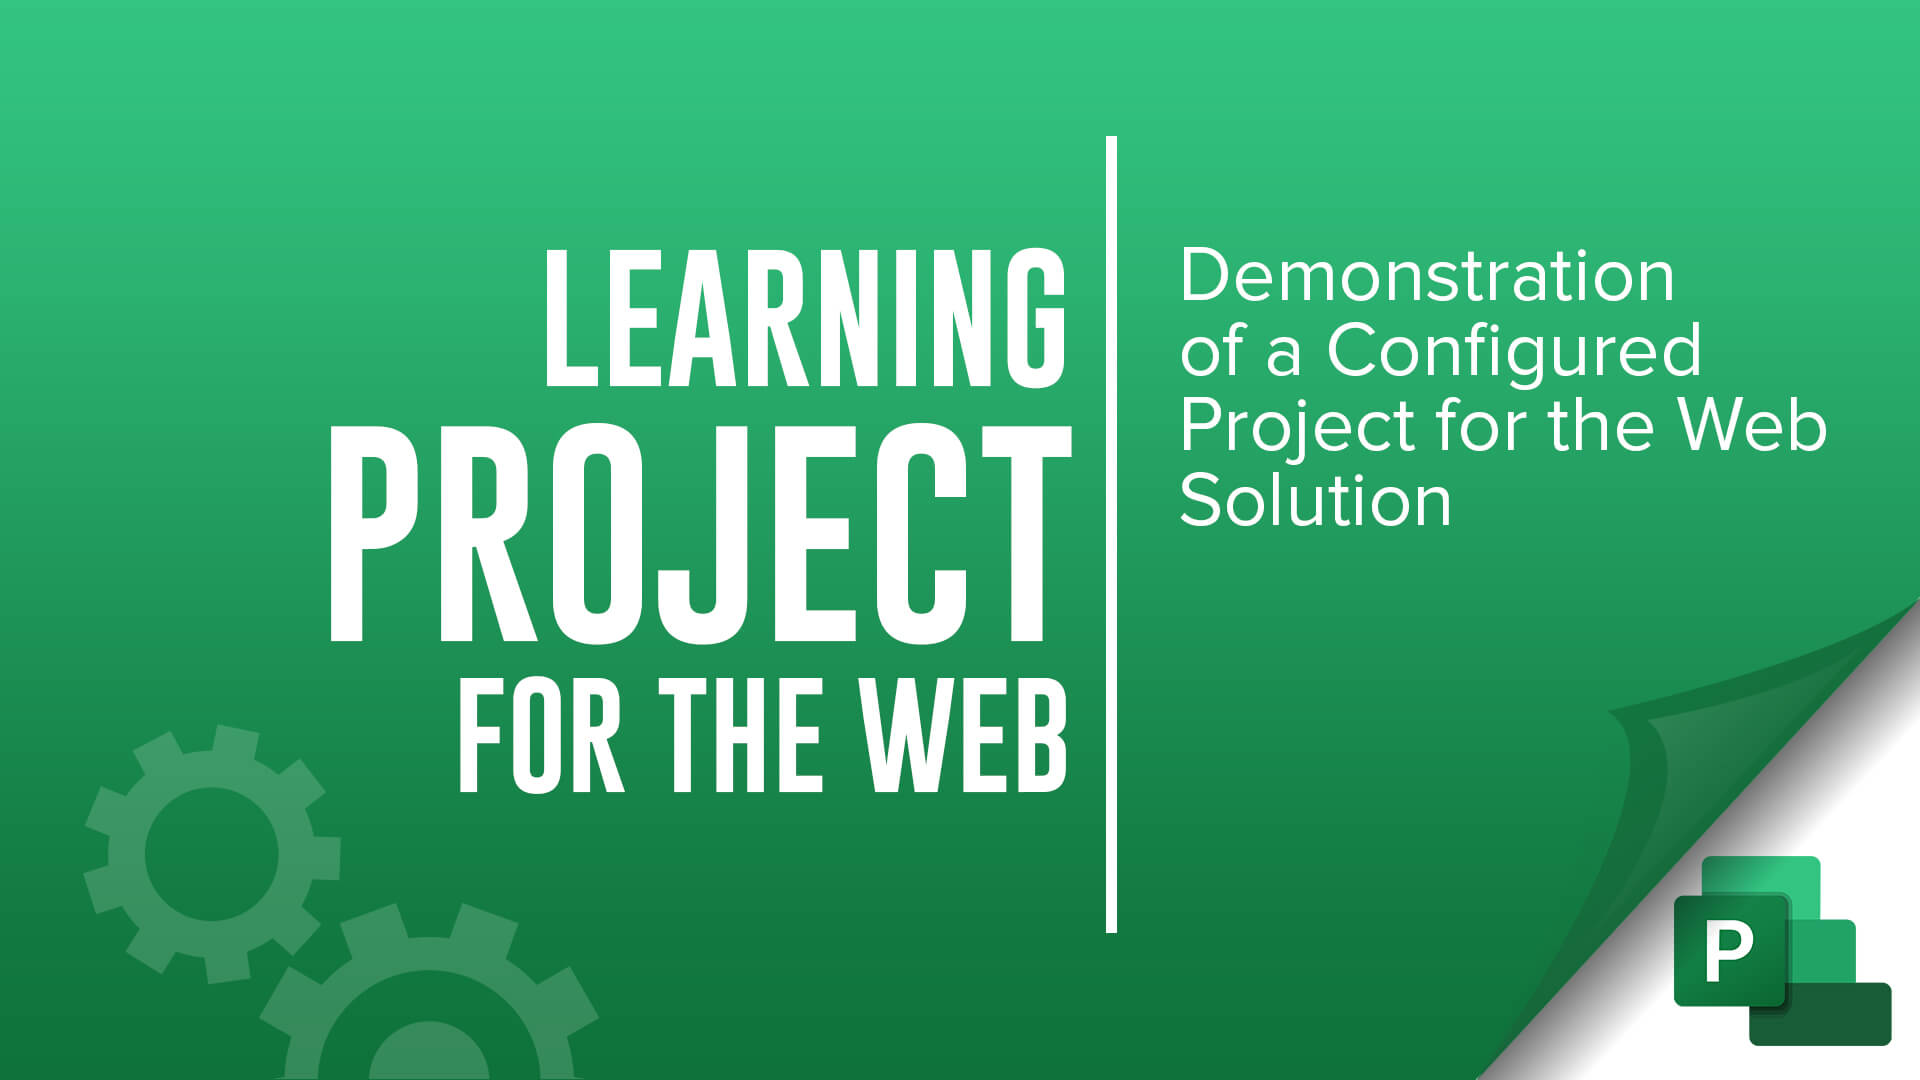 learning Project for the Web - demonsration of a configured Project for the Web solution